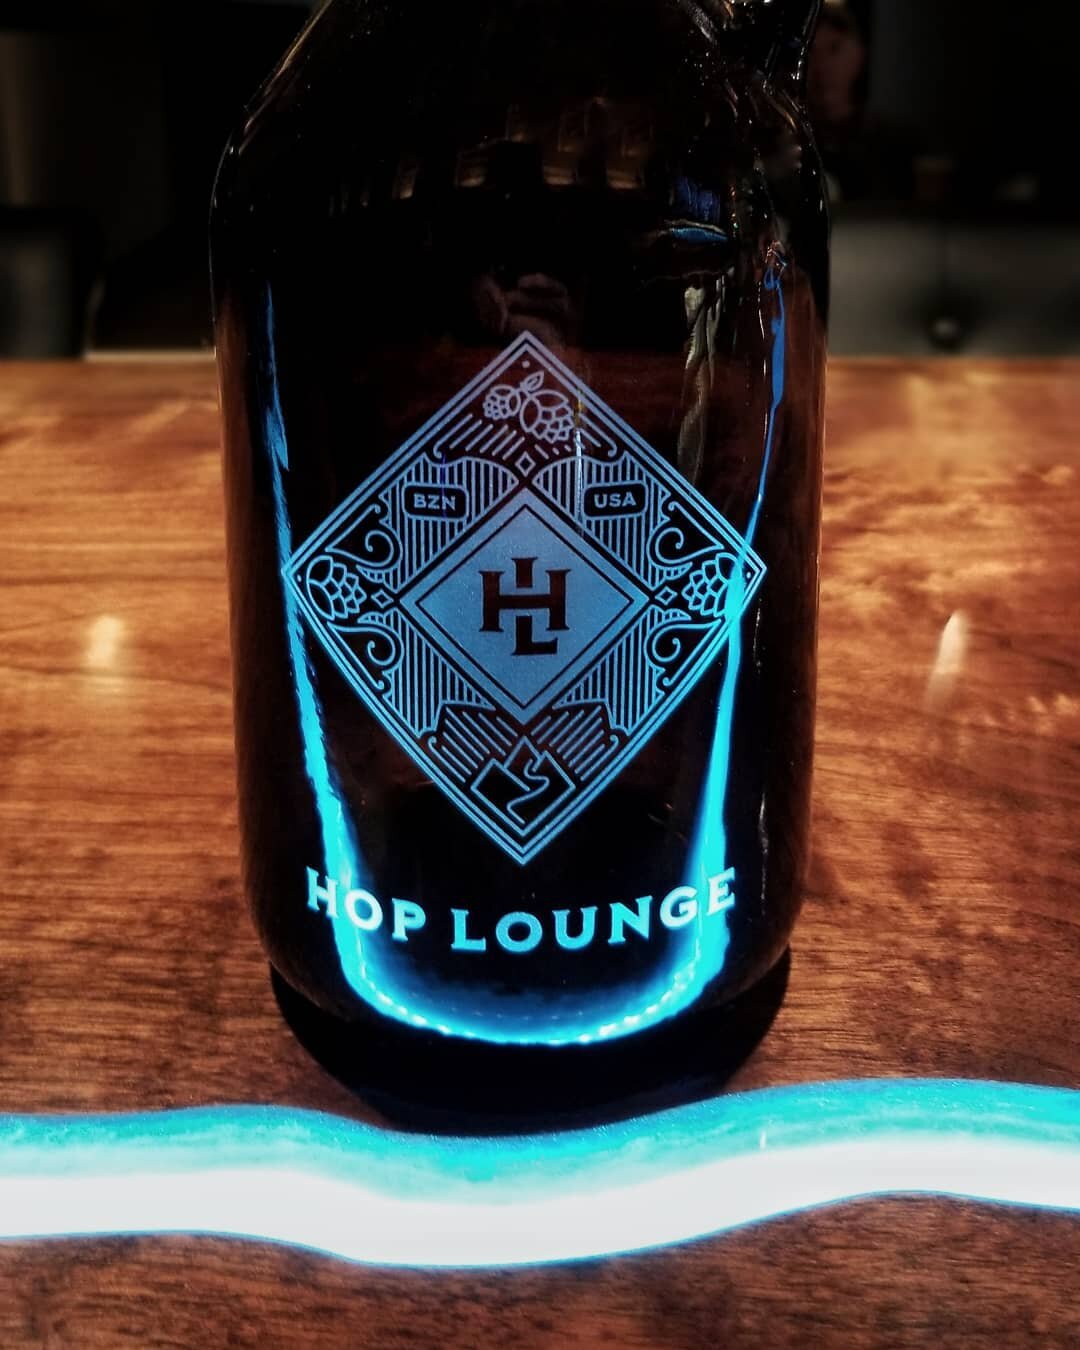 Growlers are in! All 50 taps are available for fills.
#craftbeer #bozeman #hoplounge #growler